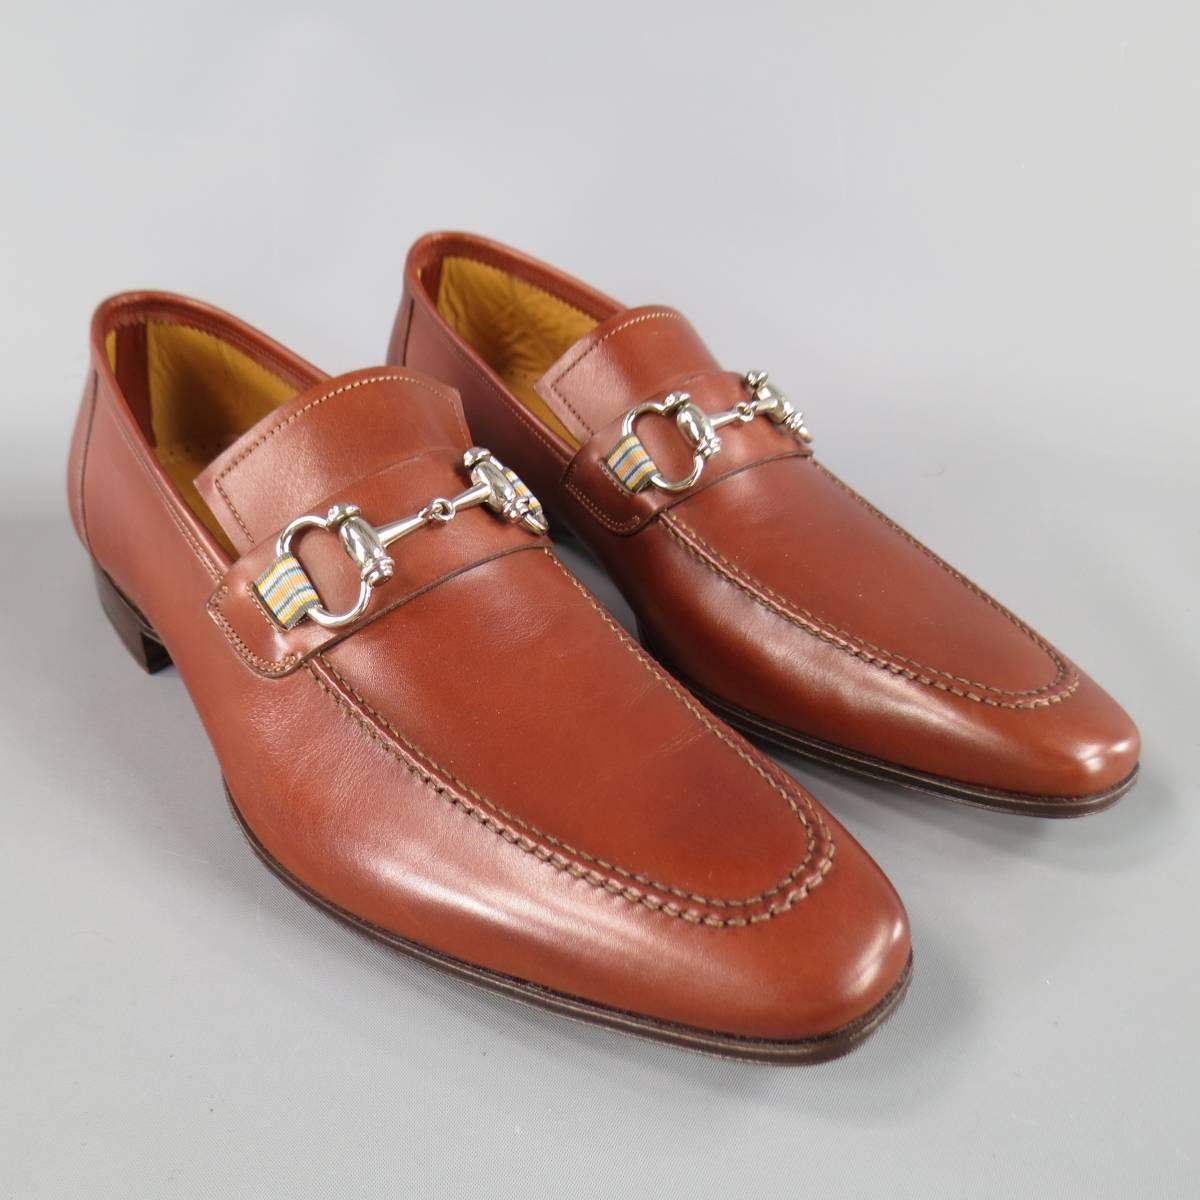 BRAND NEW PAUL STUART Loafers consists of leather material in a cognac brown color tone. Designed in a round moc toe front, top stitching with light accents. Detailed with a silver horse-bit and leather sole. Made in Spain.
 
New Pre-Owned Condition